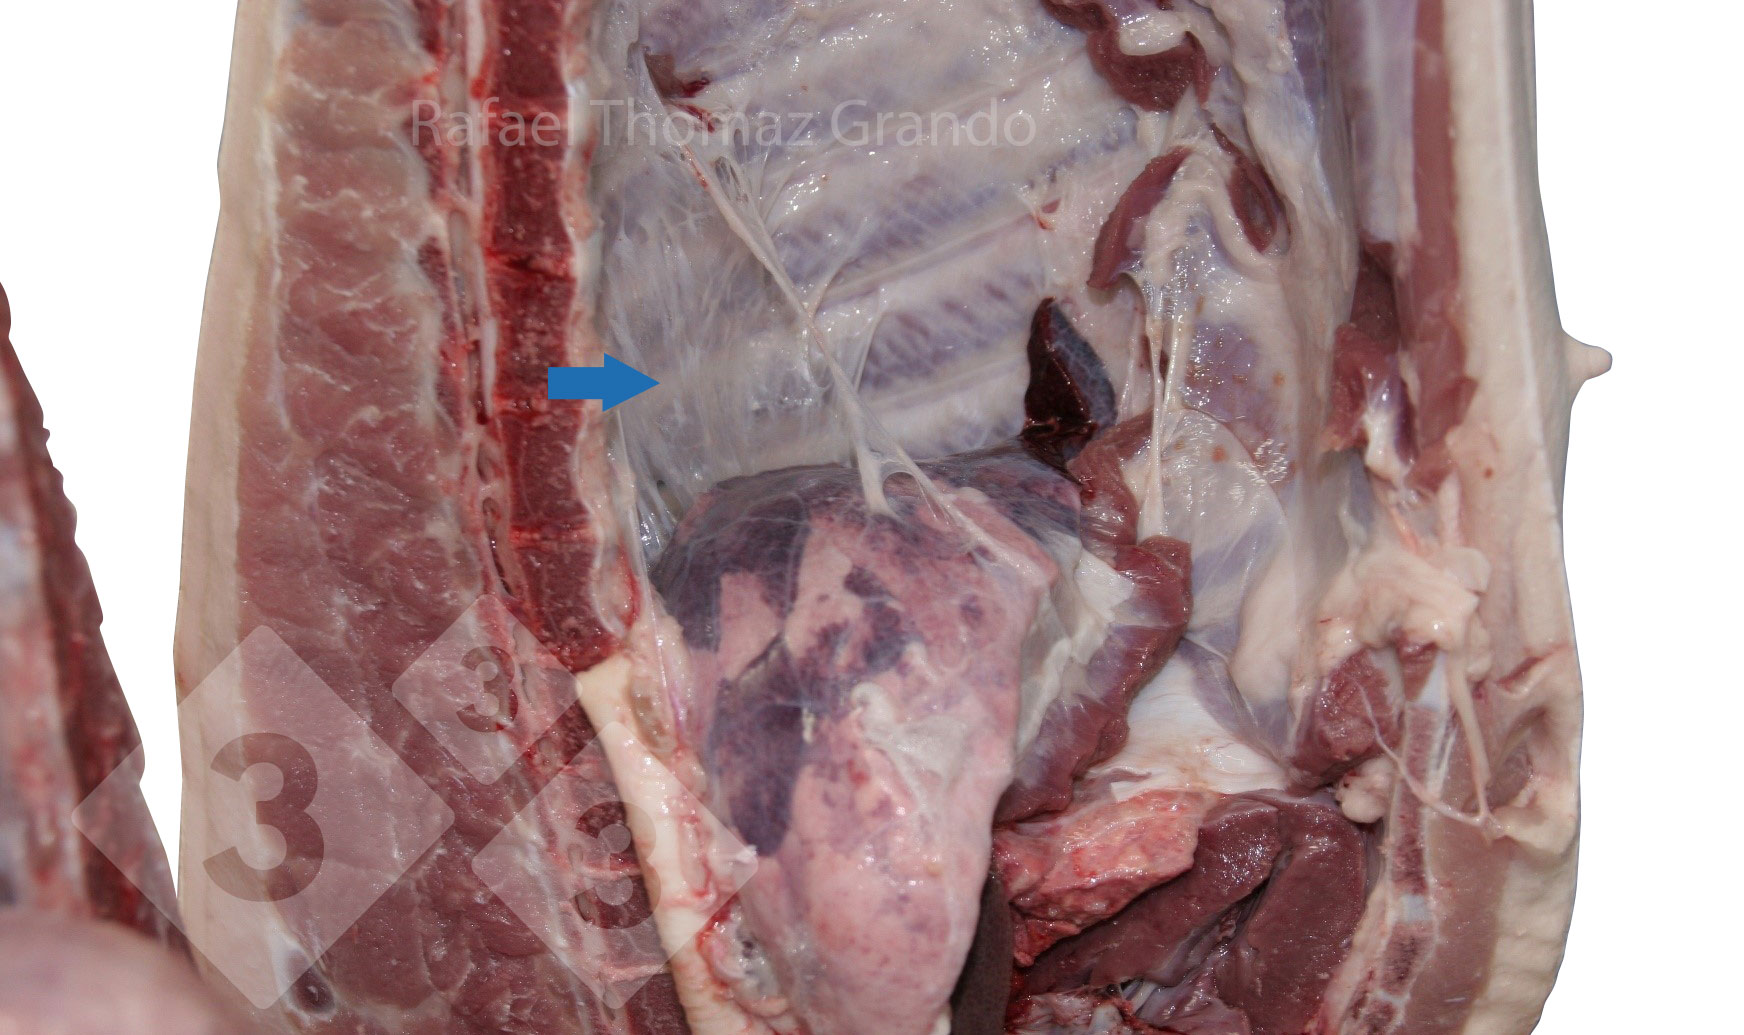 Figure 2. Pleurisy detected in the swine respiratory tract at slaughter